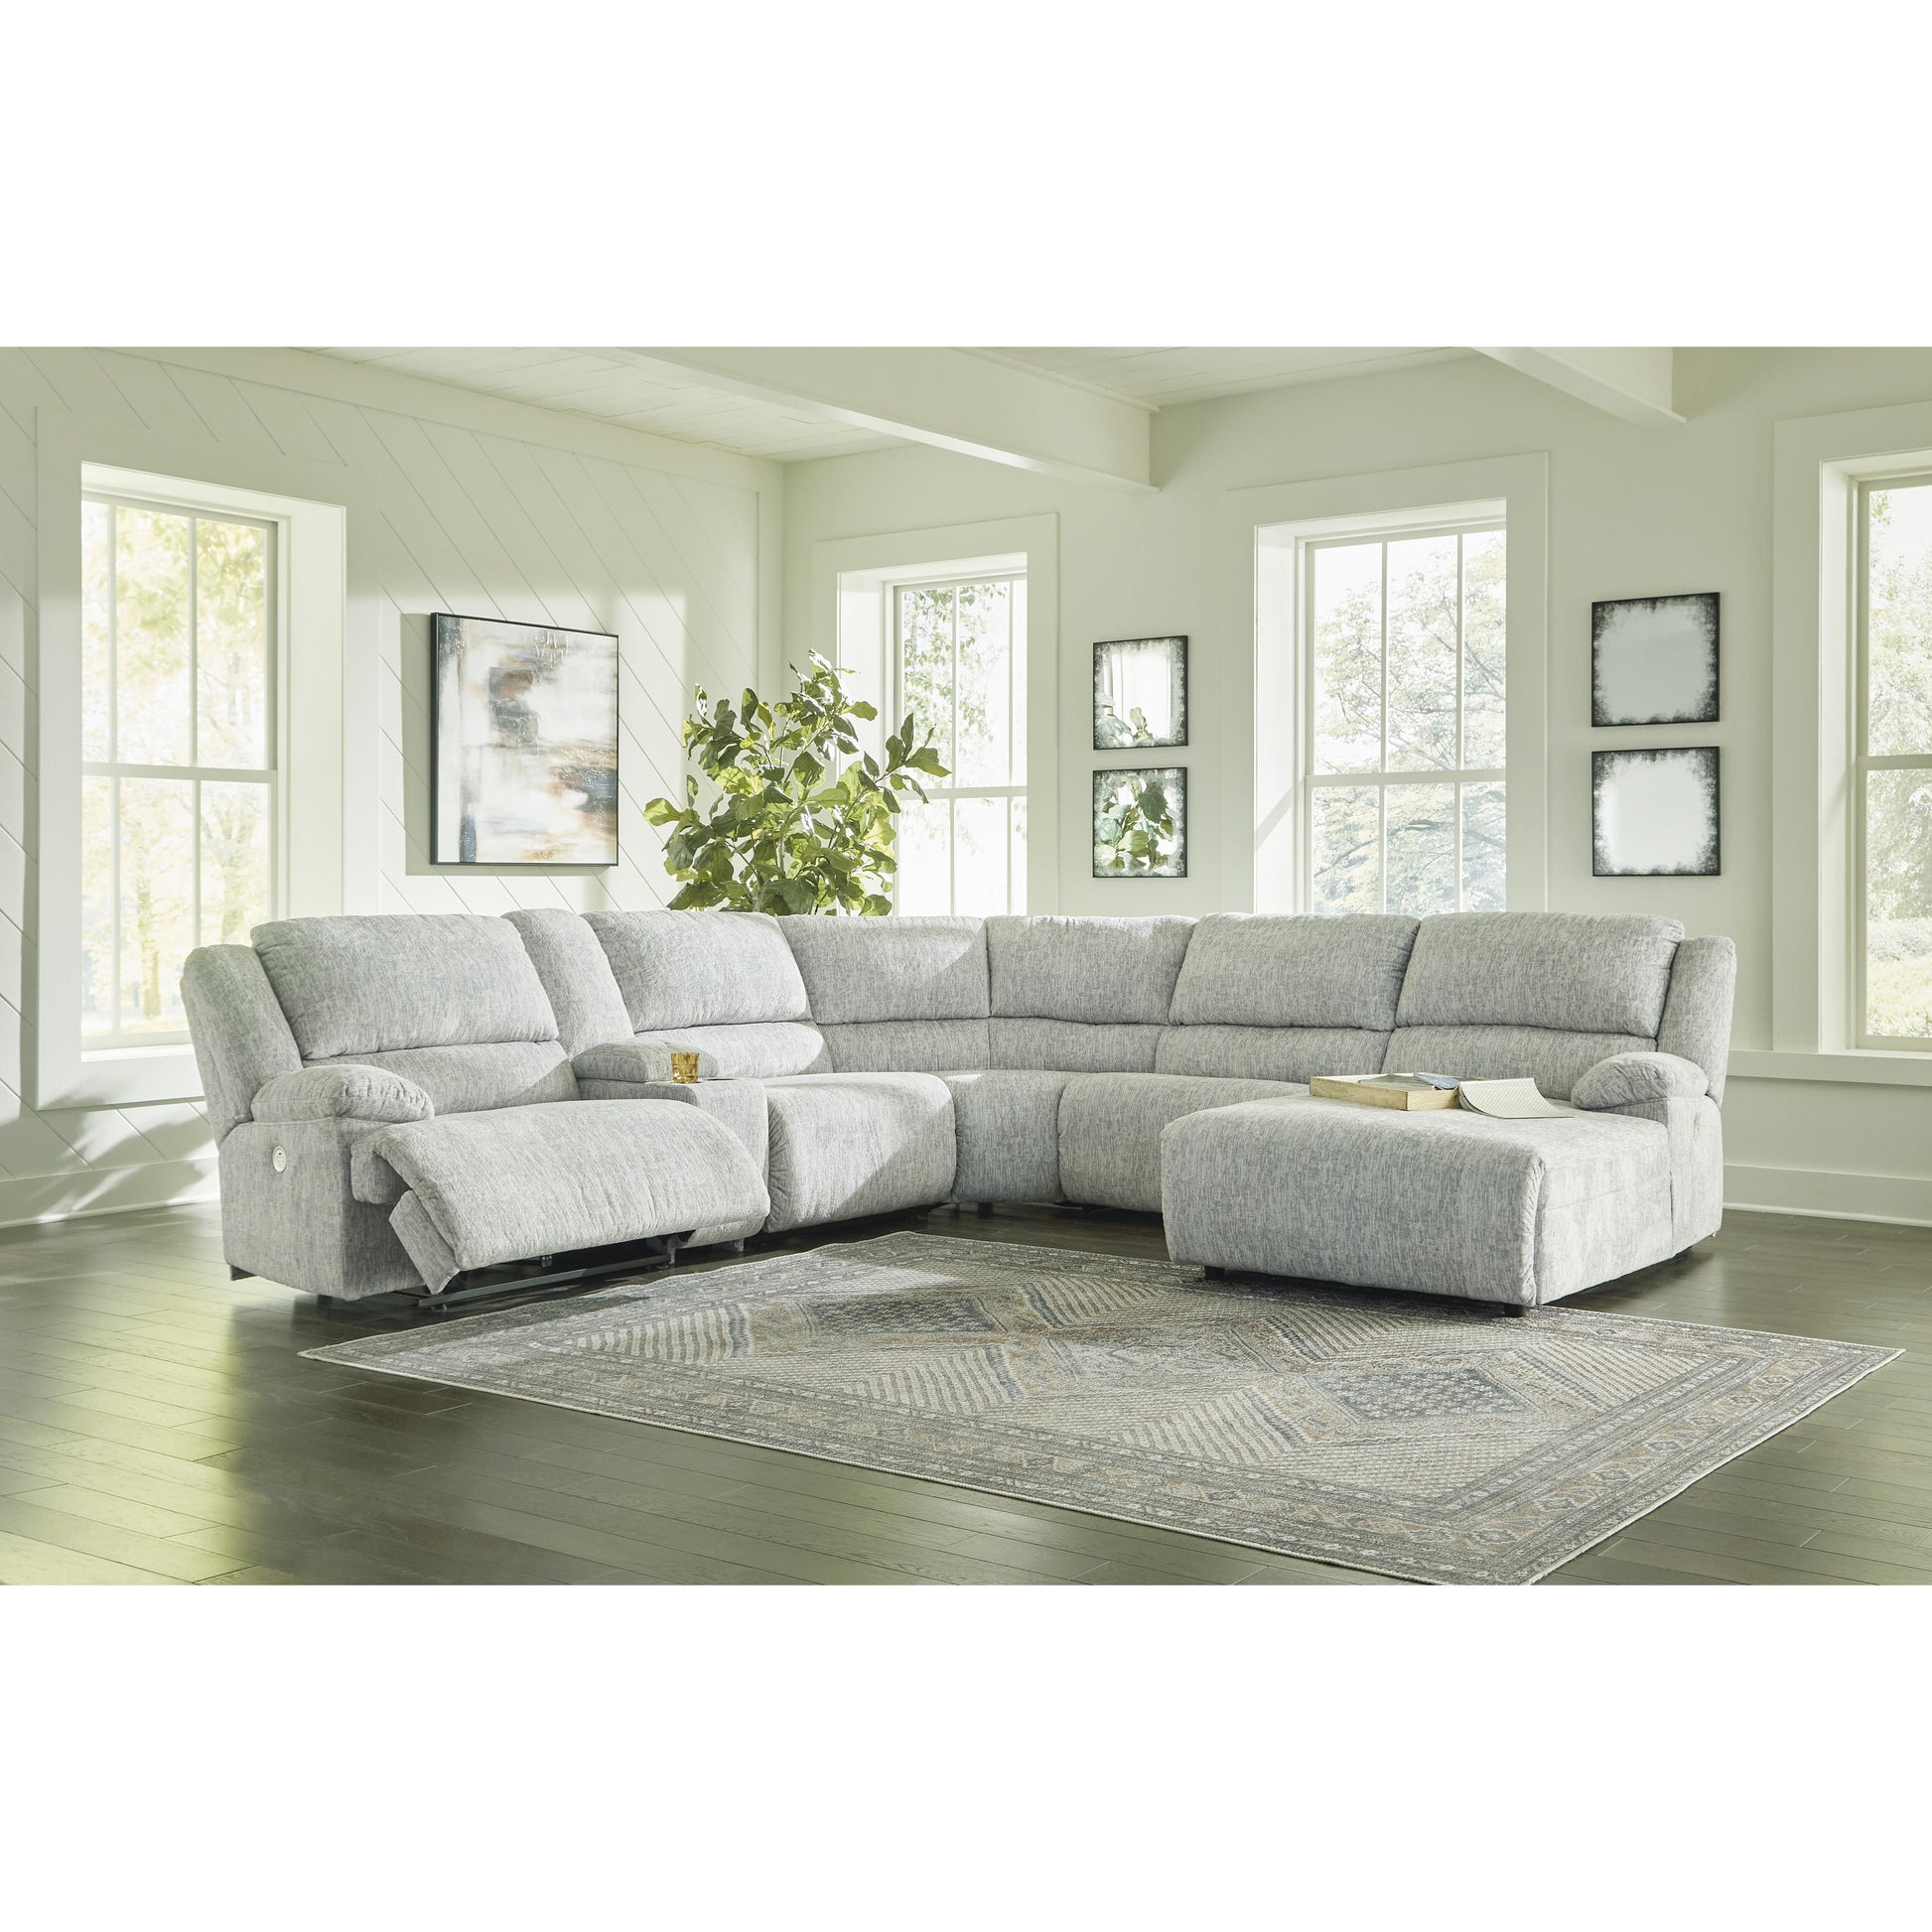 Signature Design by Ashley McClelland Power Reclining Fabric 6 pc Sectional 2930258/2930257/2930219/2930277/2930246/2930297 IMAGE 3